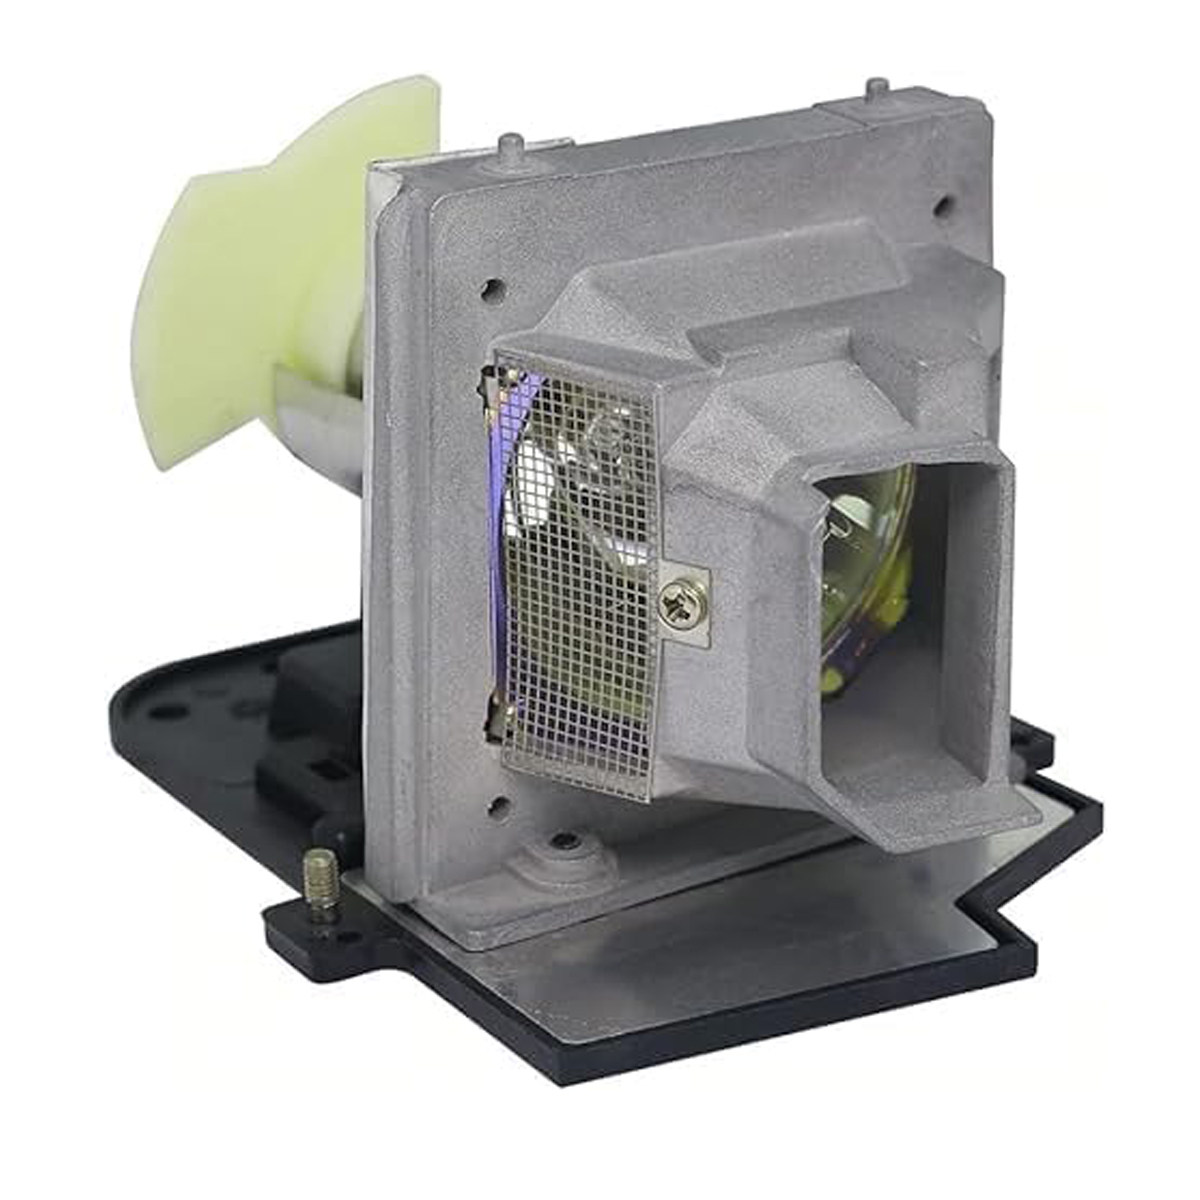 Replacement Projector lamp EC.J3901.001 For ACER XD1150 XD1150D XD1250